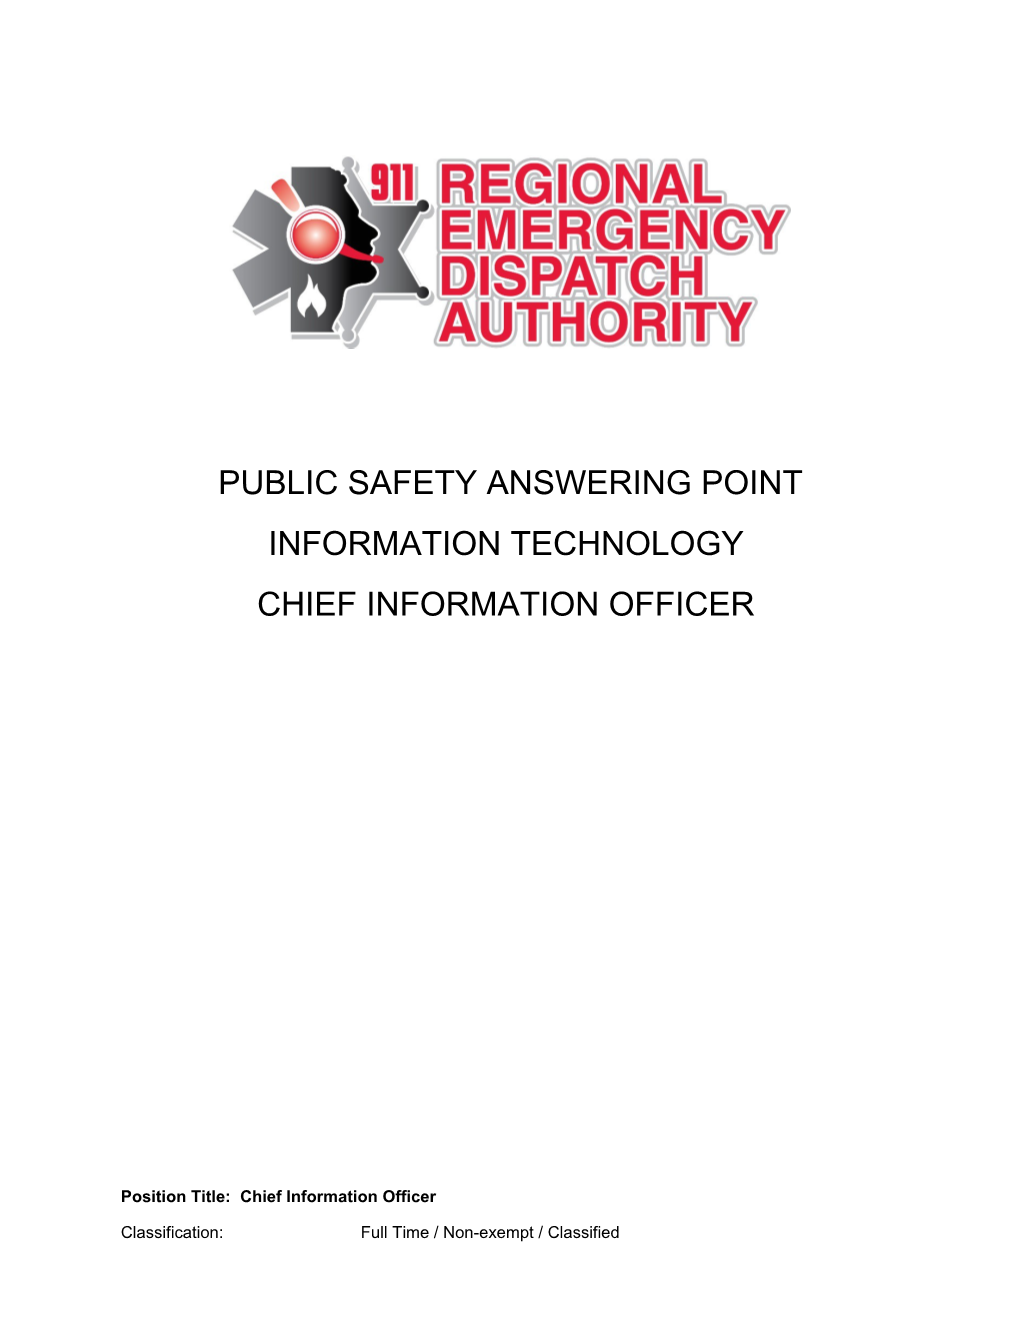 Public Safety Answering Point